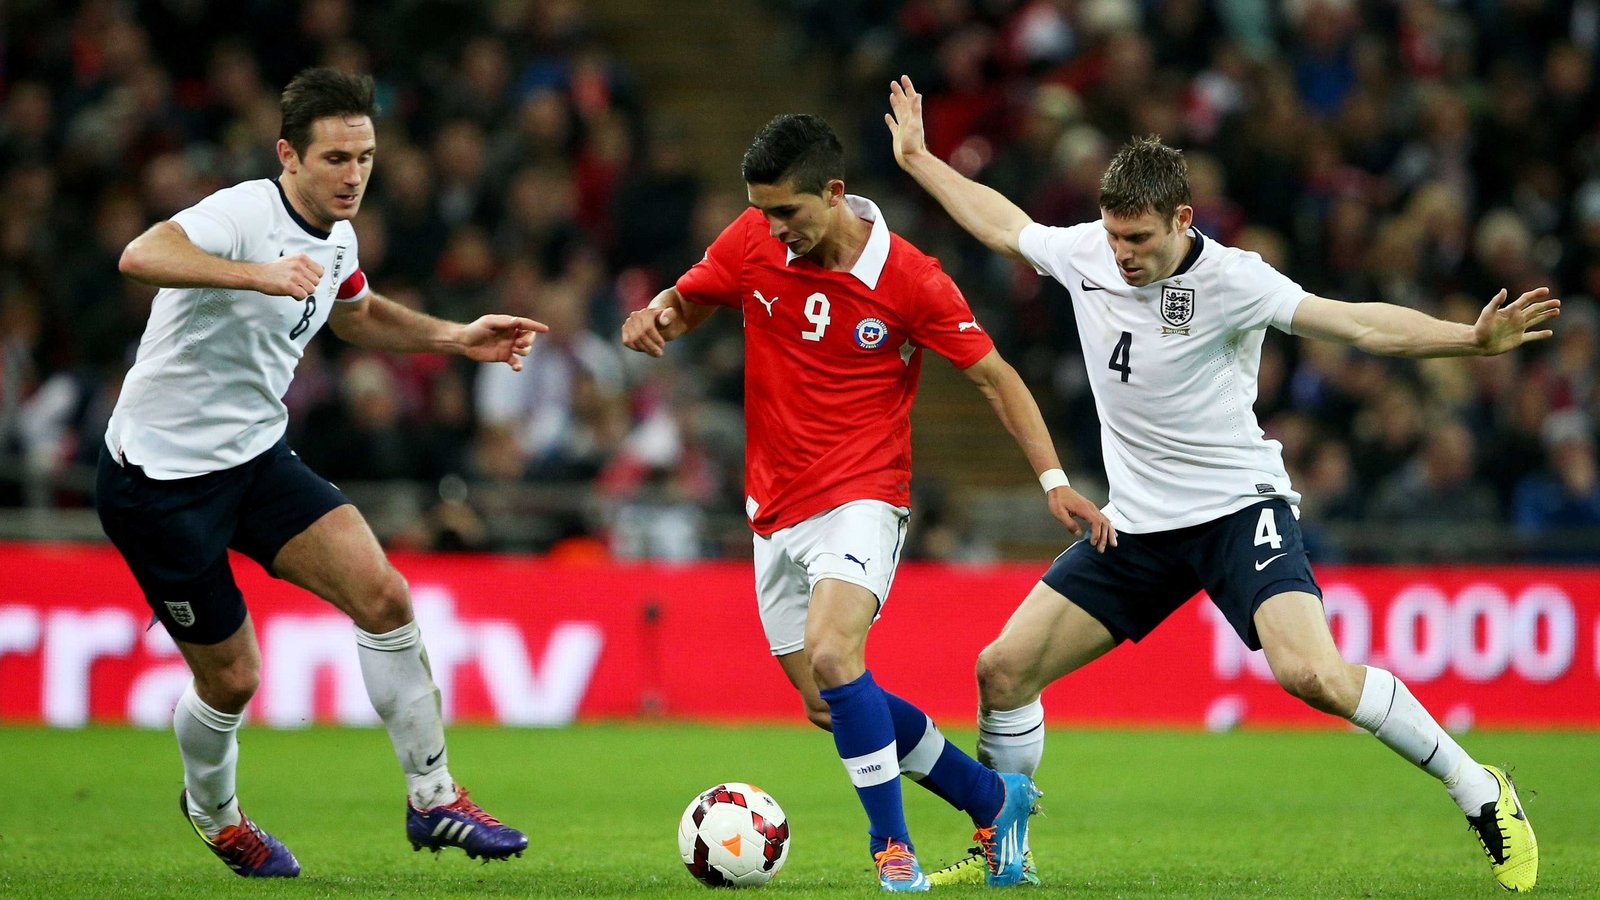 Chile defeat England at Wembley